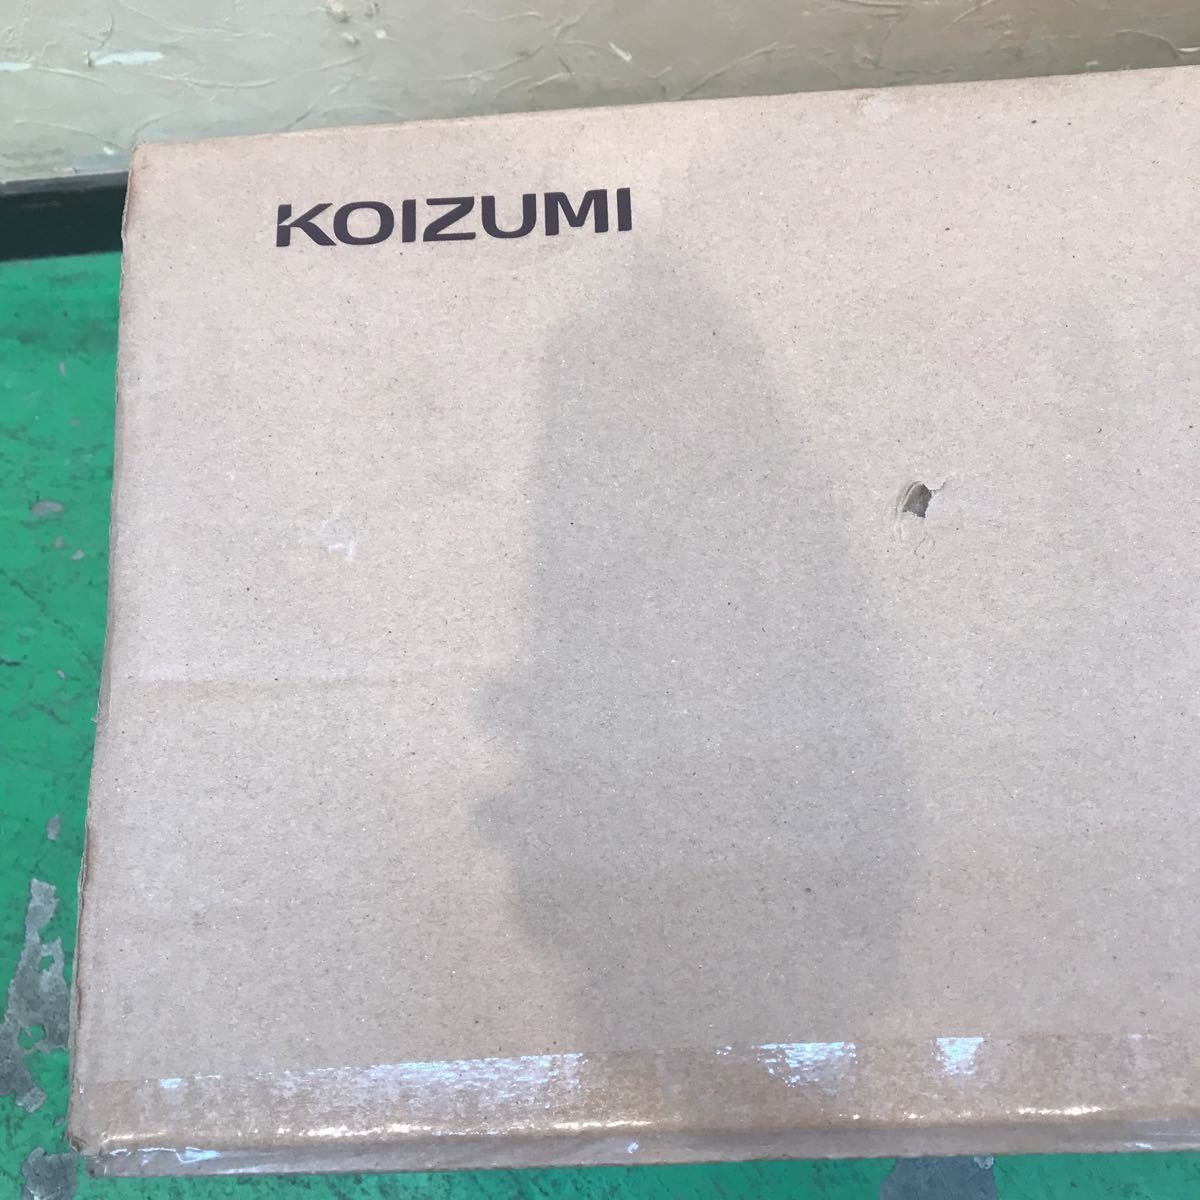  Koizumi personal mat KDM-L112/P carrying . daytime . electric lie down on the floor mat 